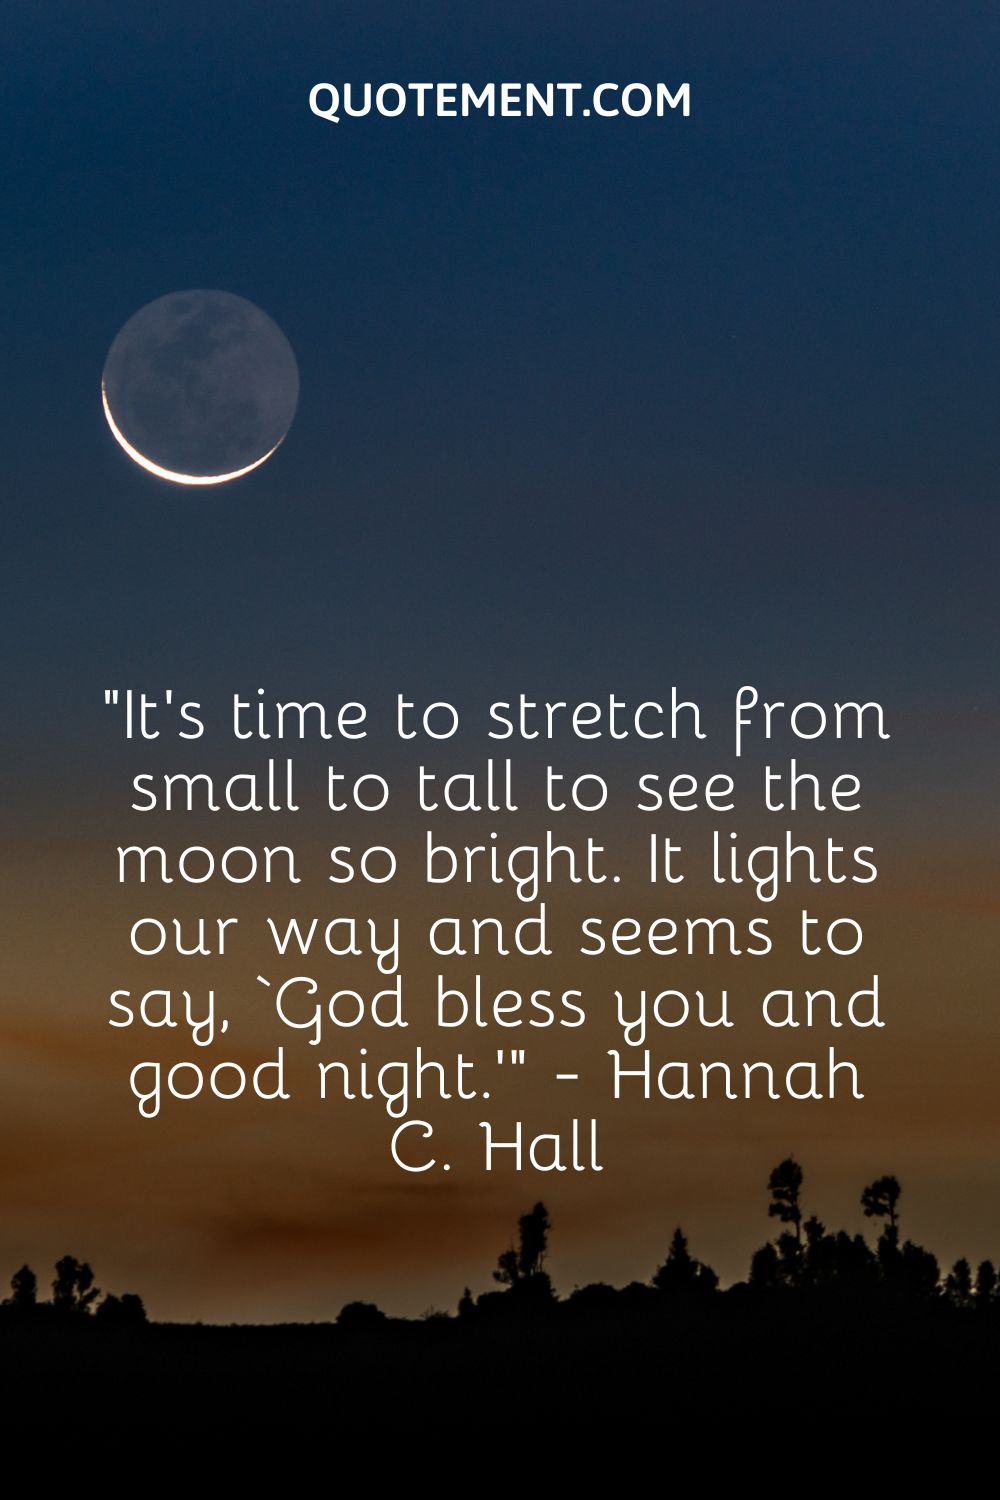 It's time to stretch from small to tall to see the moon so bright